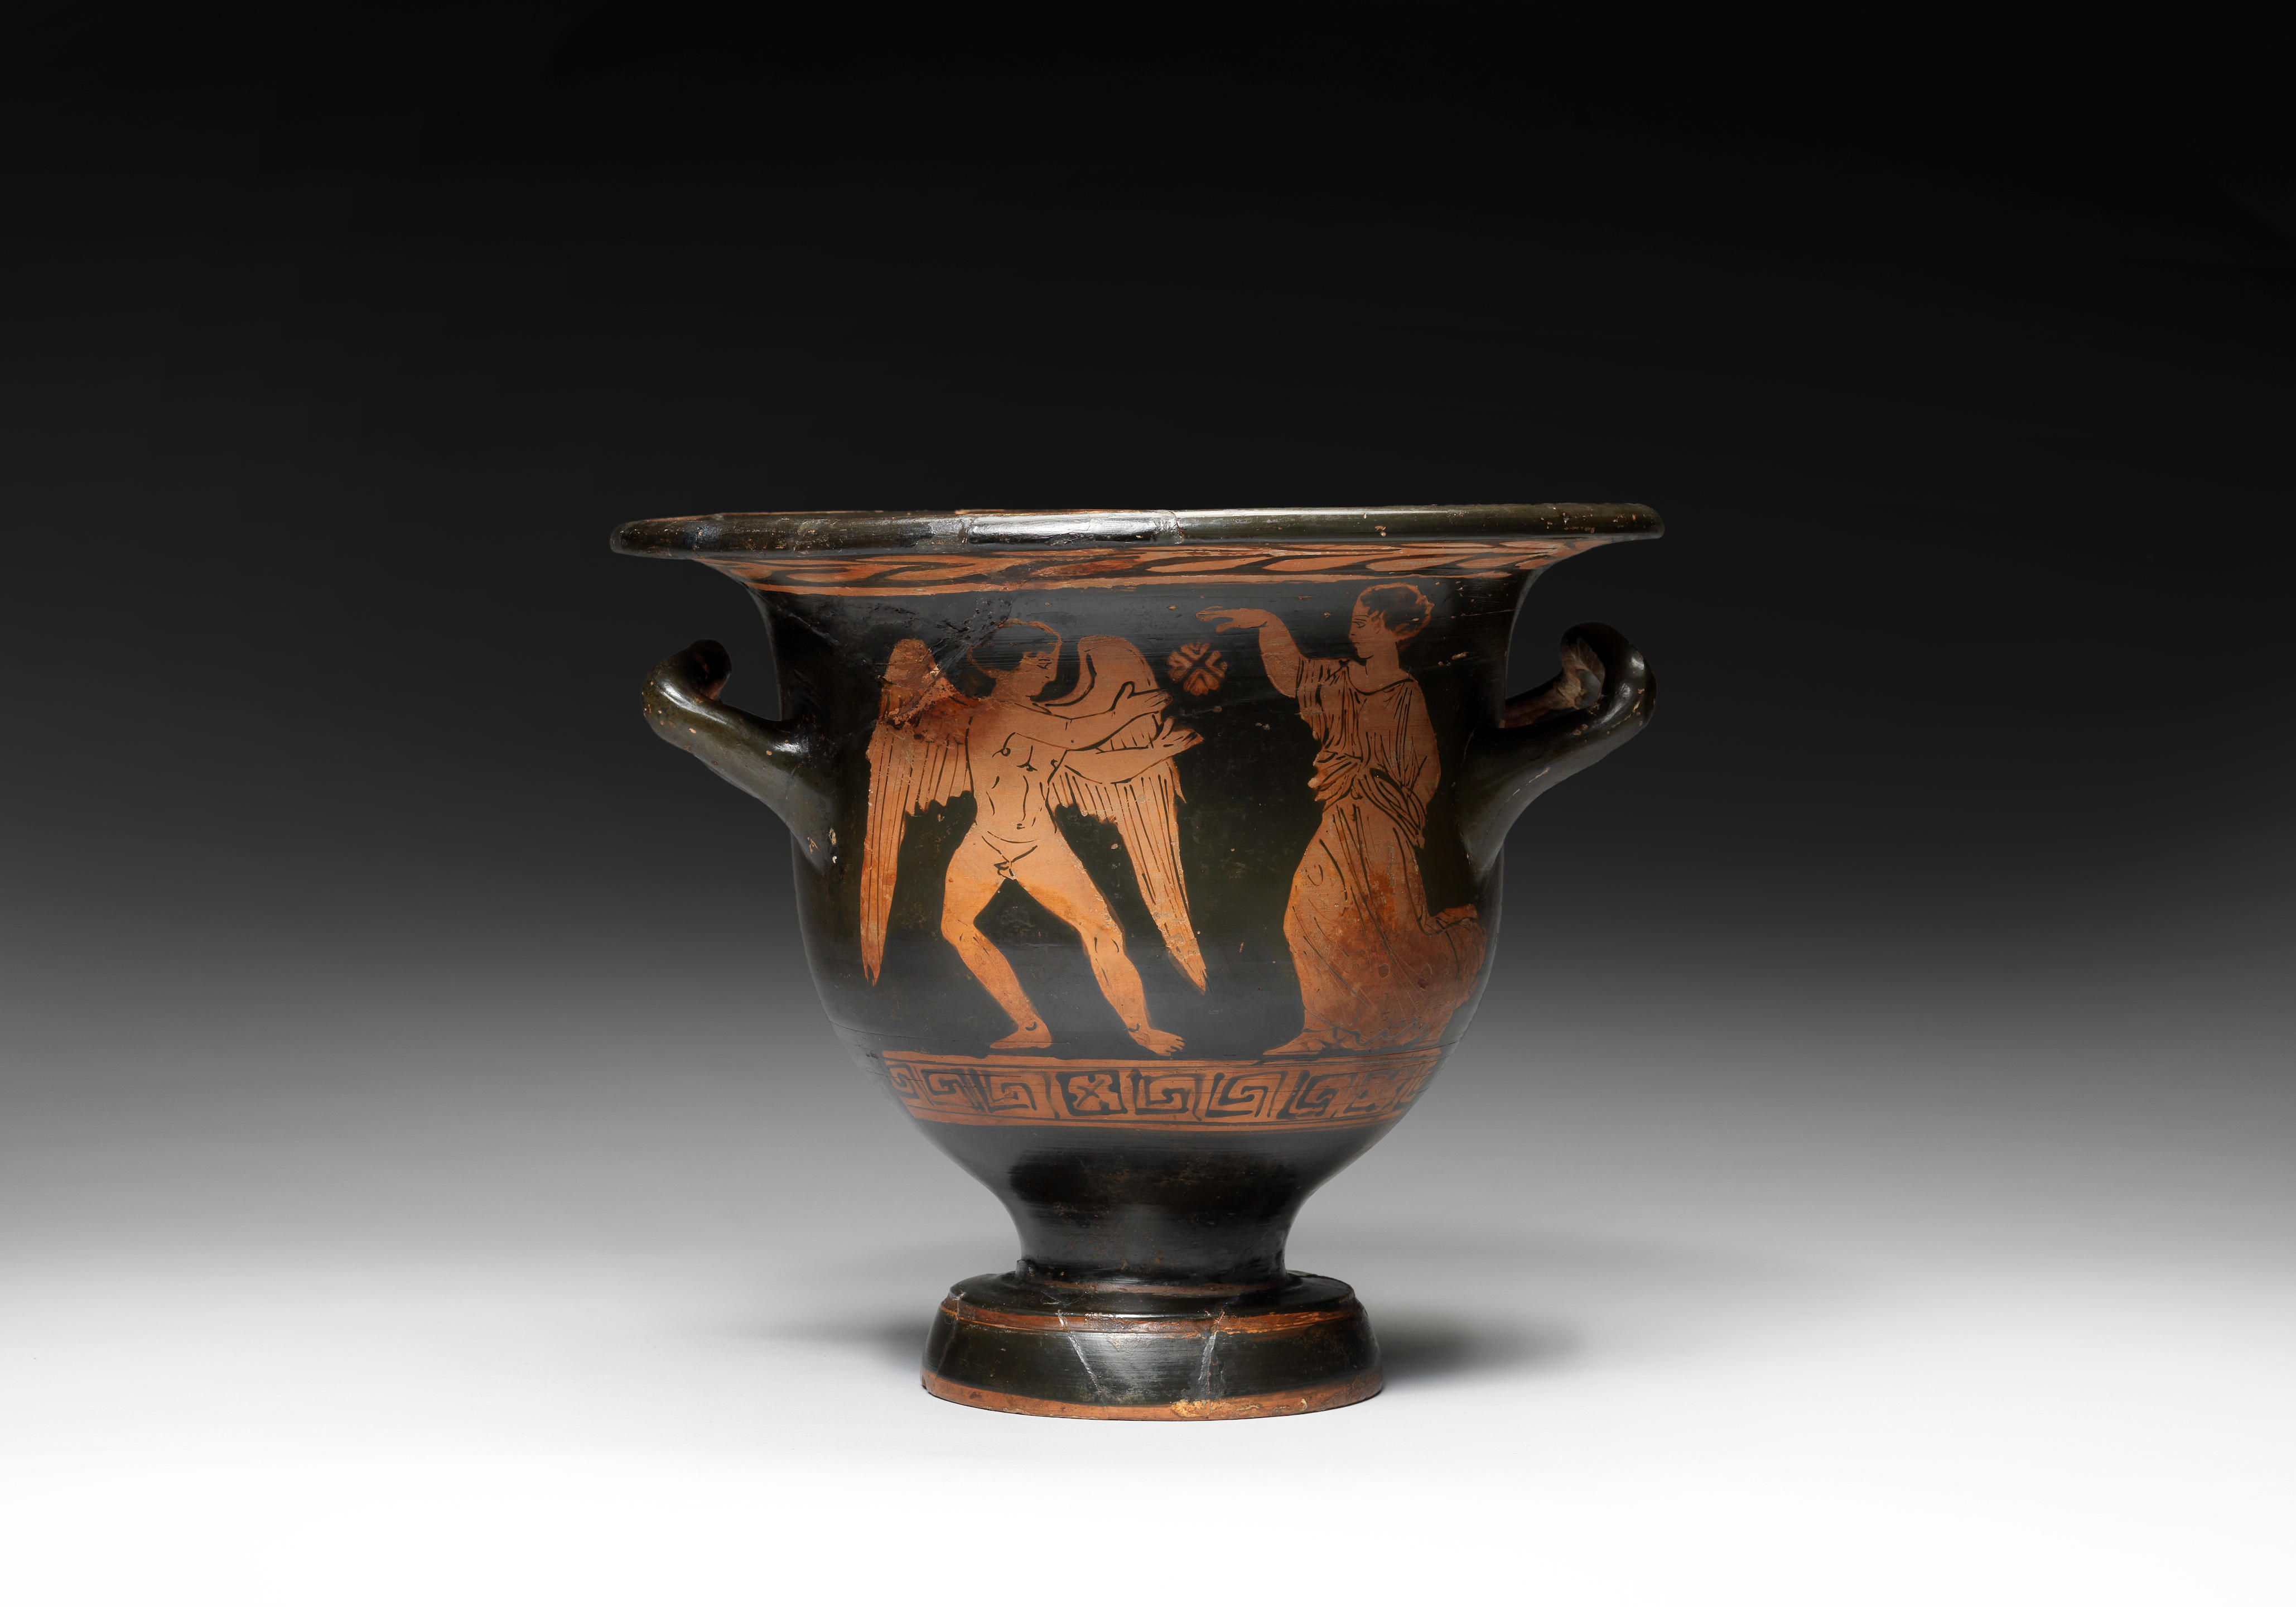 download free red figure bell krater